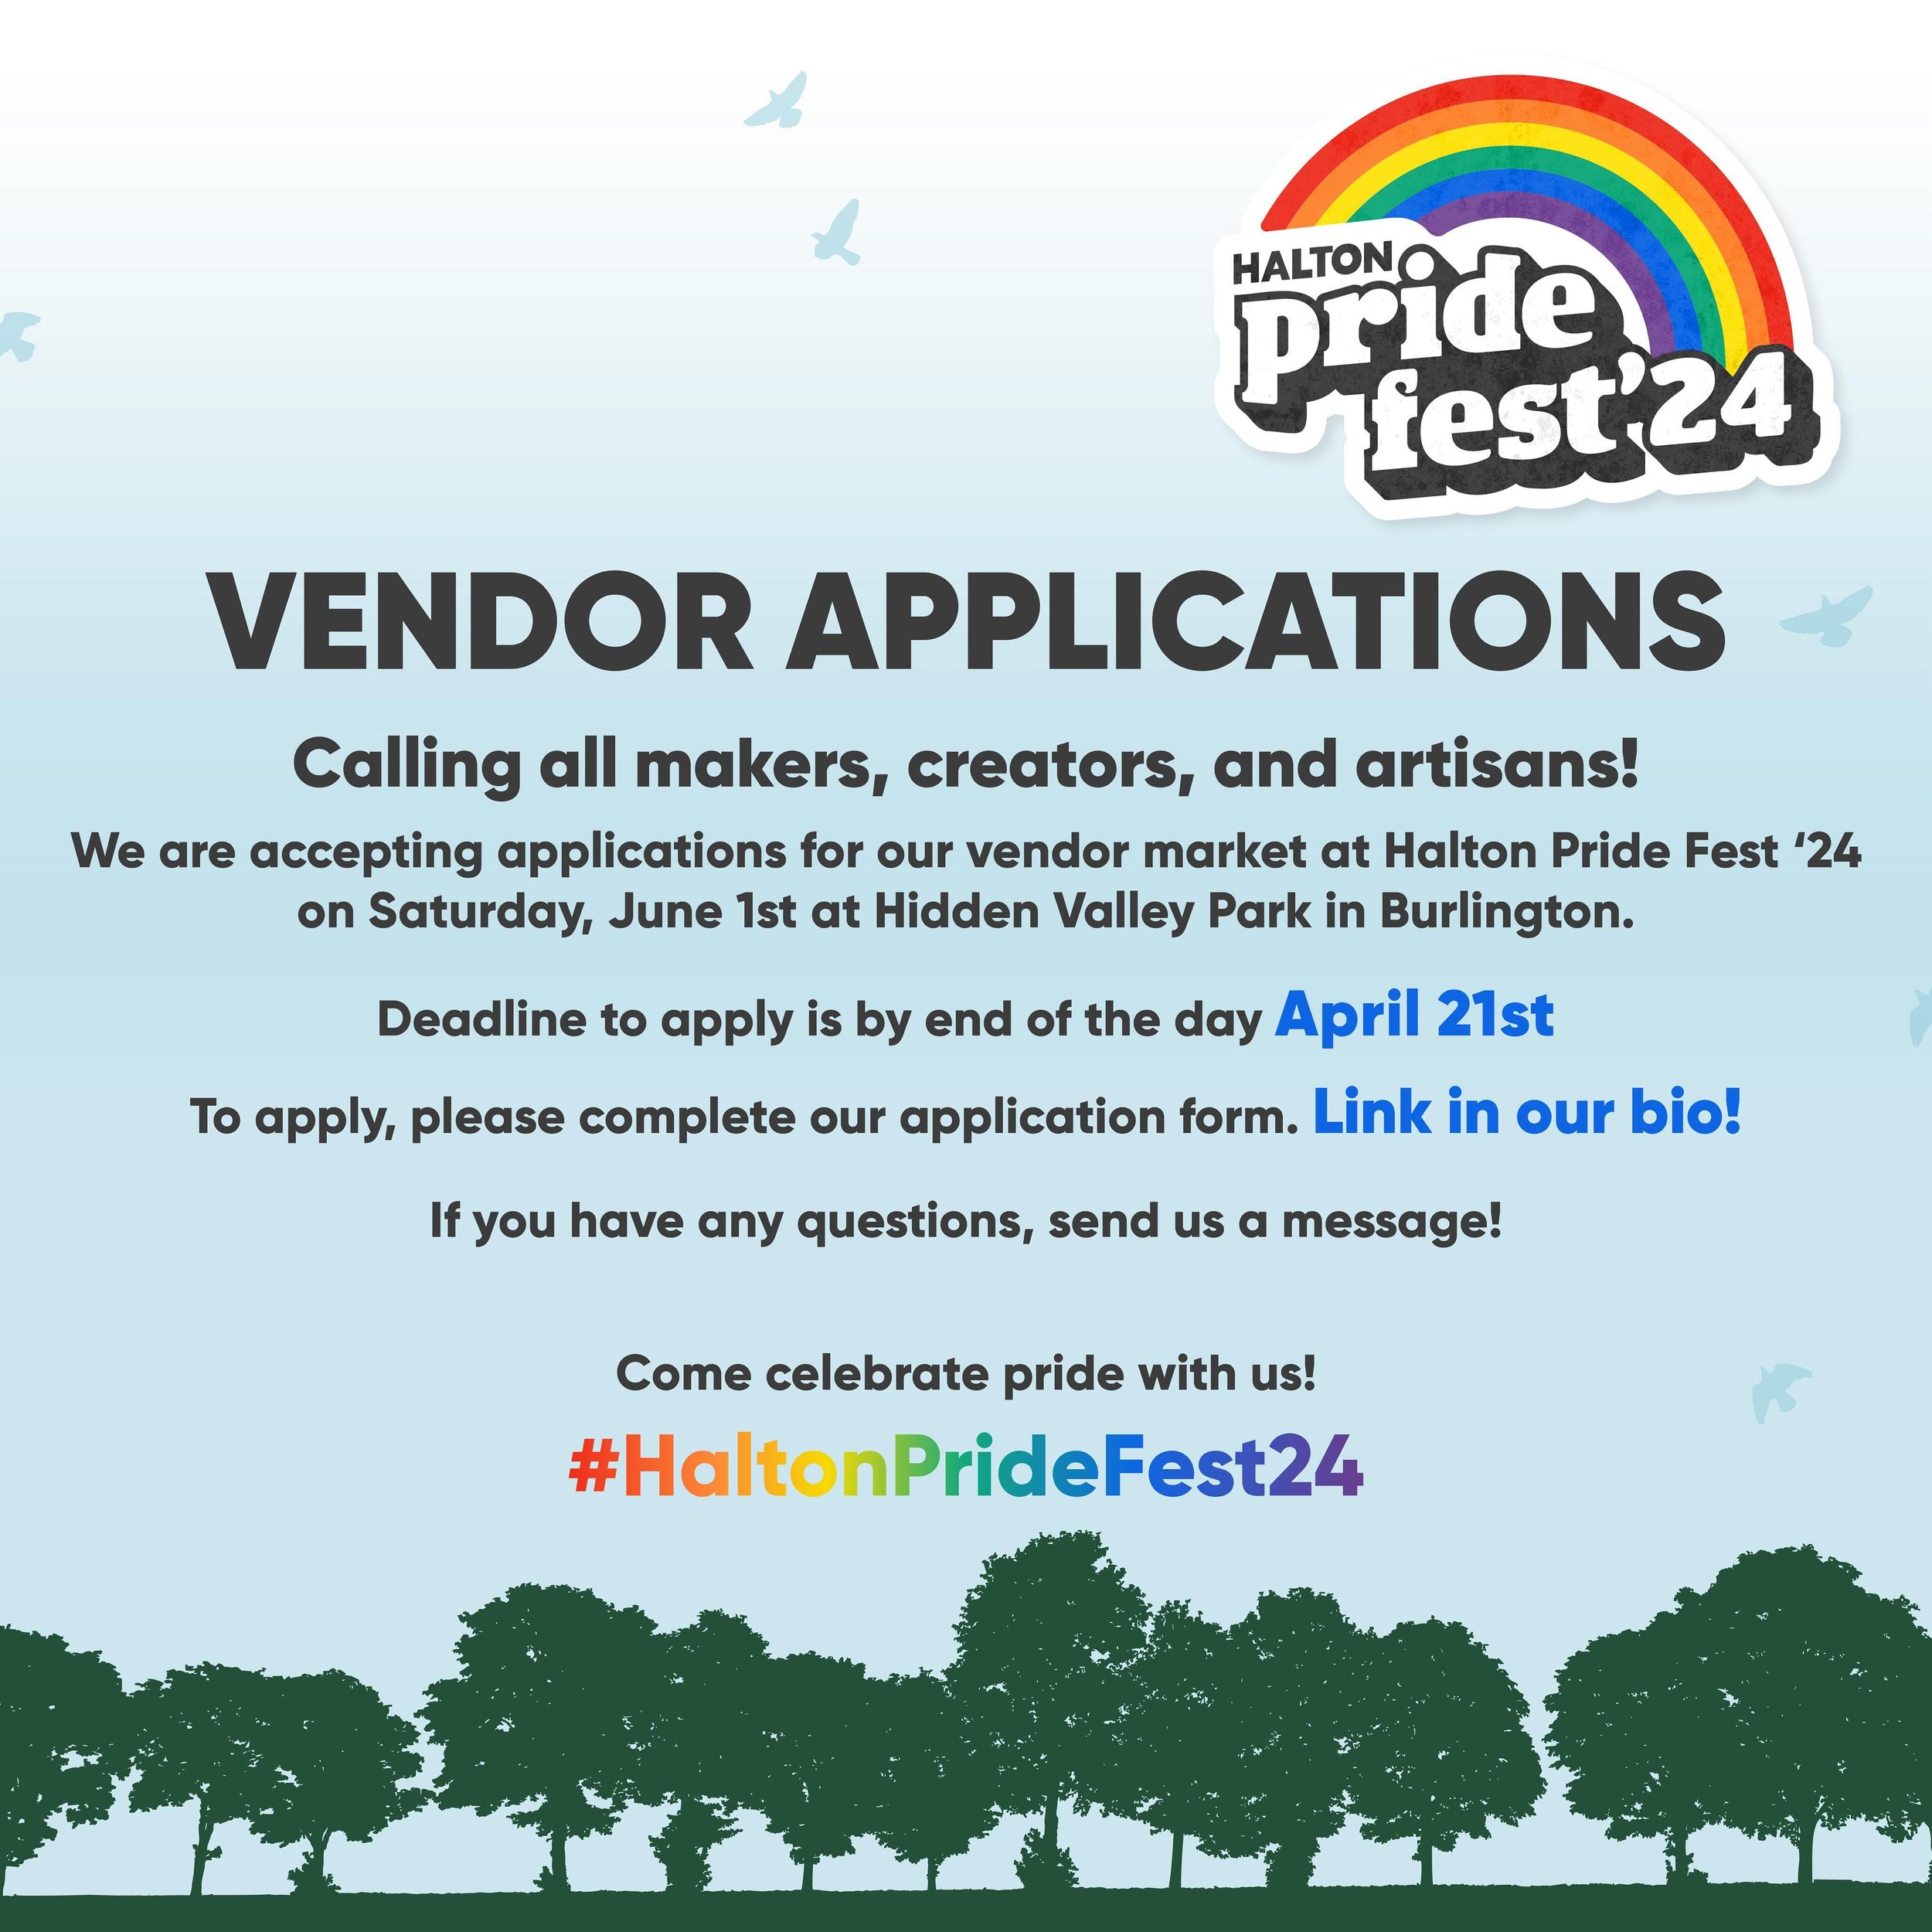 Our vendor applications for Halton Pride Fest &lsquo;24 are closing soon! 

If you are interested in being a vendor at Halton Pride Fest, you have until Sunday, April 21st to get your vendor application in! 

Link in bio.